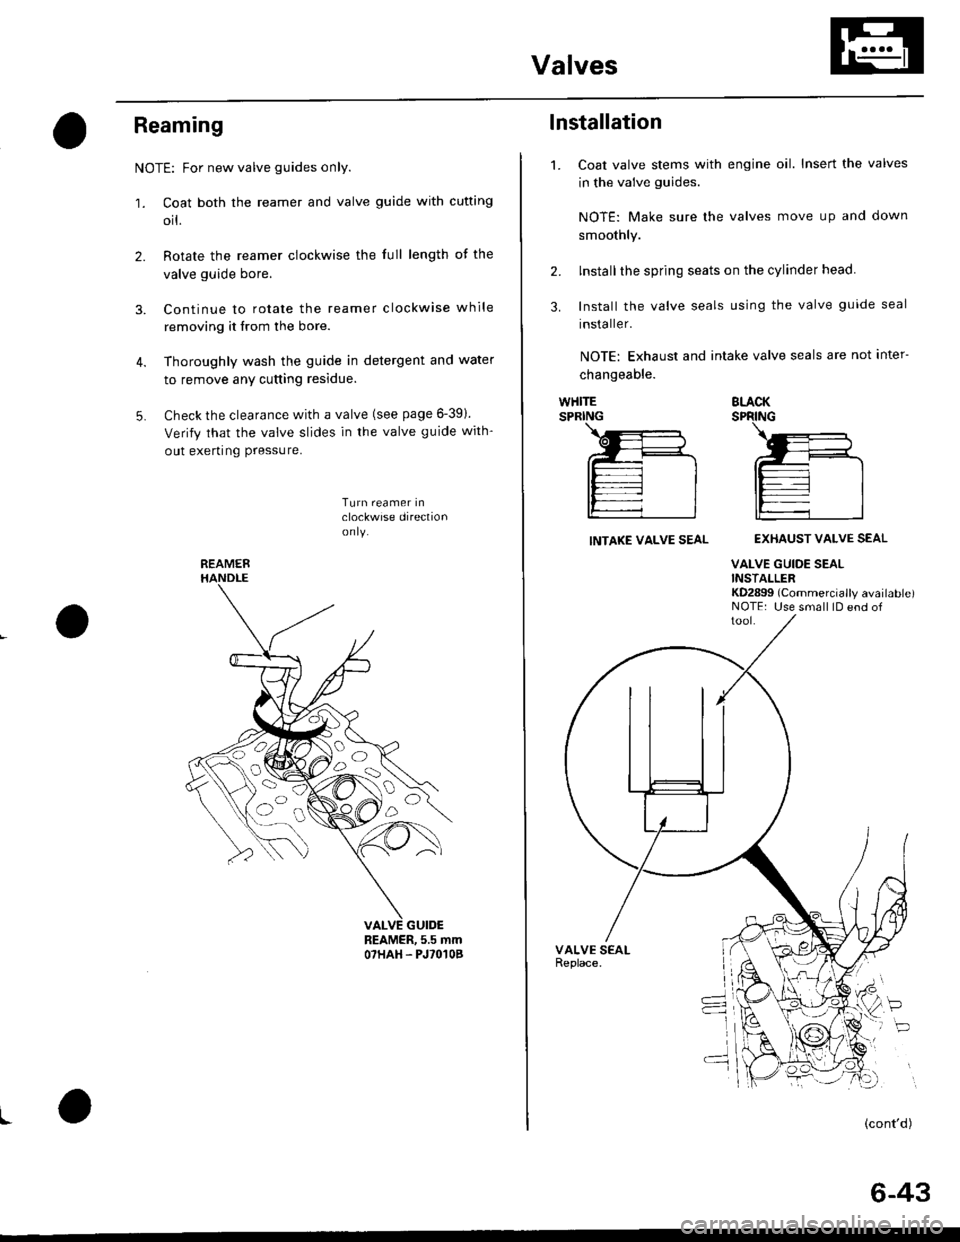 HONDA CIVIC 2000 6.G Owners Manual Valves
Reaming
NOTE: For new valve guides only.
1. Coat both the reamer and valve guide with cufting
orl.
2. Rotate the reamer clockwise the full length of the
valve guide bore.
3. Continue to rotate 